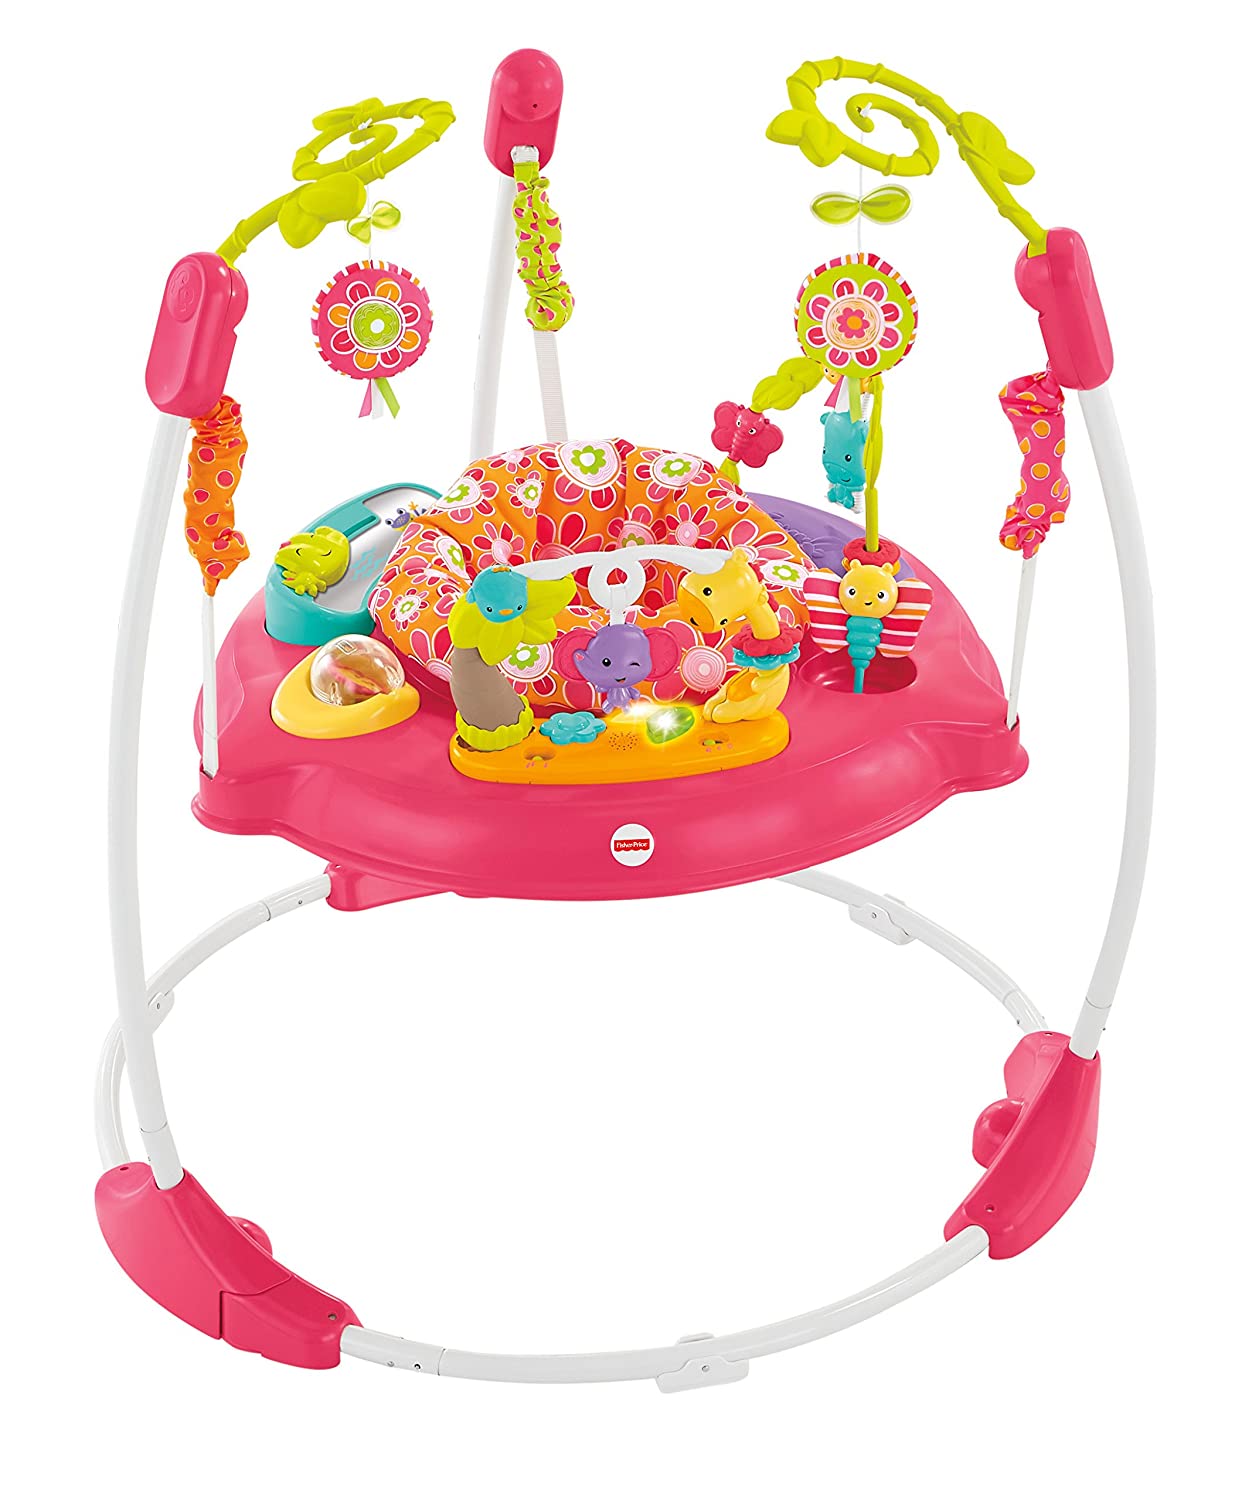 7 Best Fisher Price Jumperoo Reviews in 2023 4